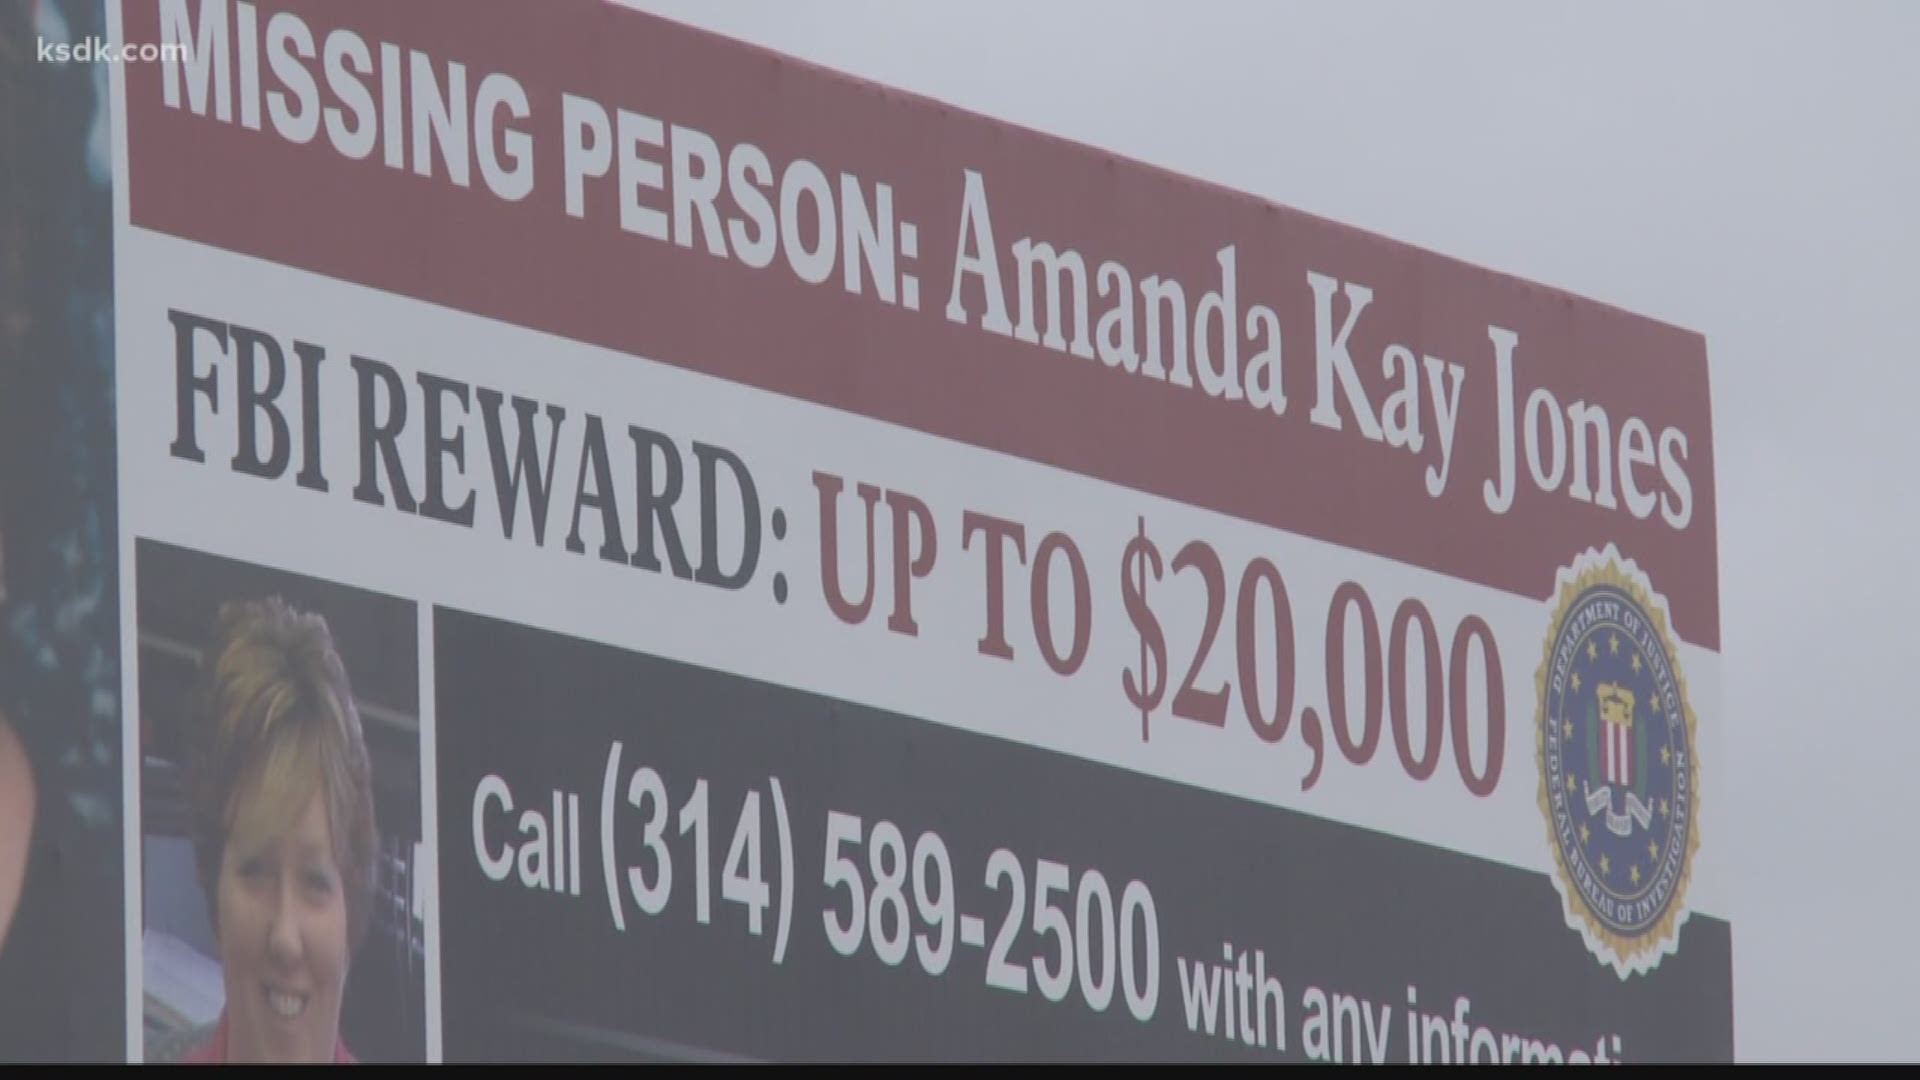 A pregnant woman goes missing from a small Jefferson County town. Now, more than 13 years later, there's a renewed effort to find her.